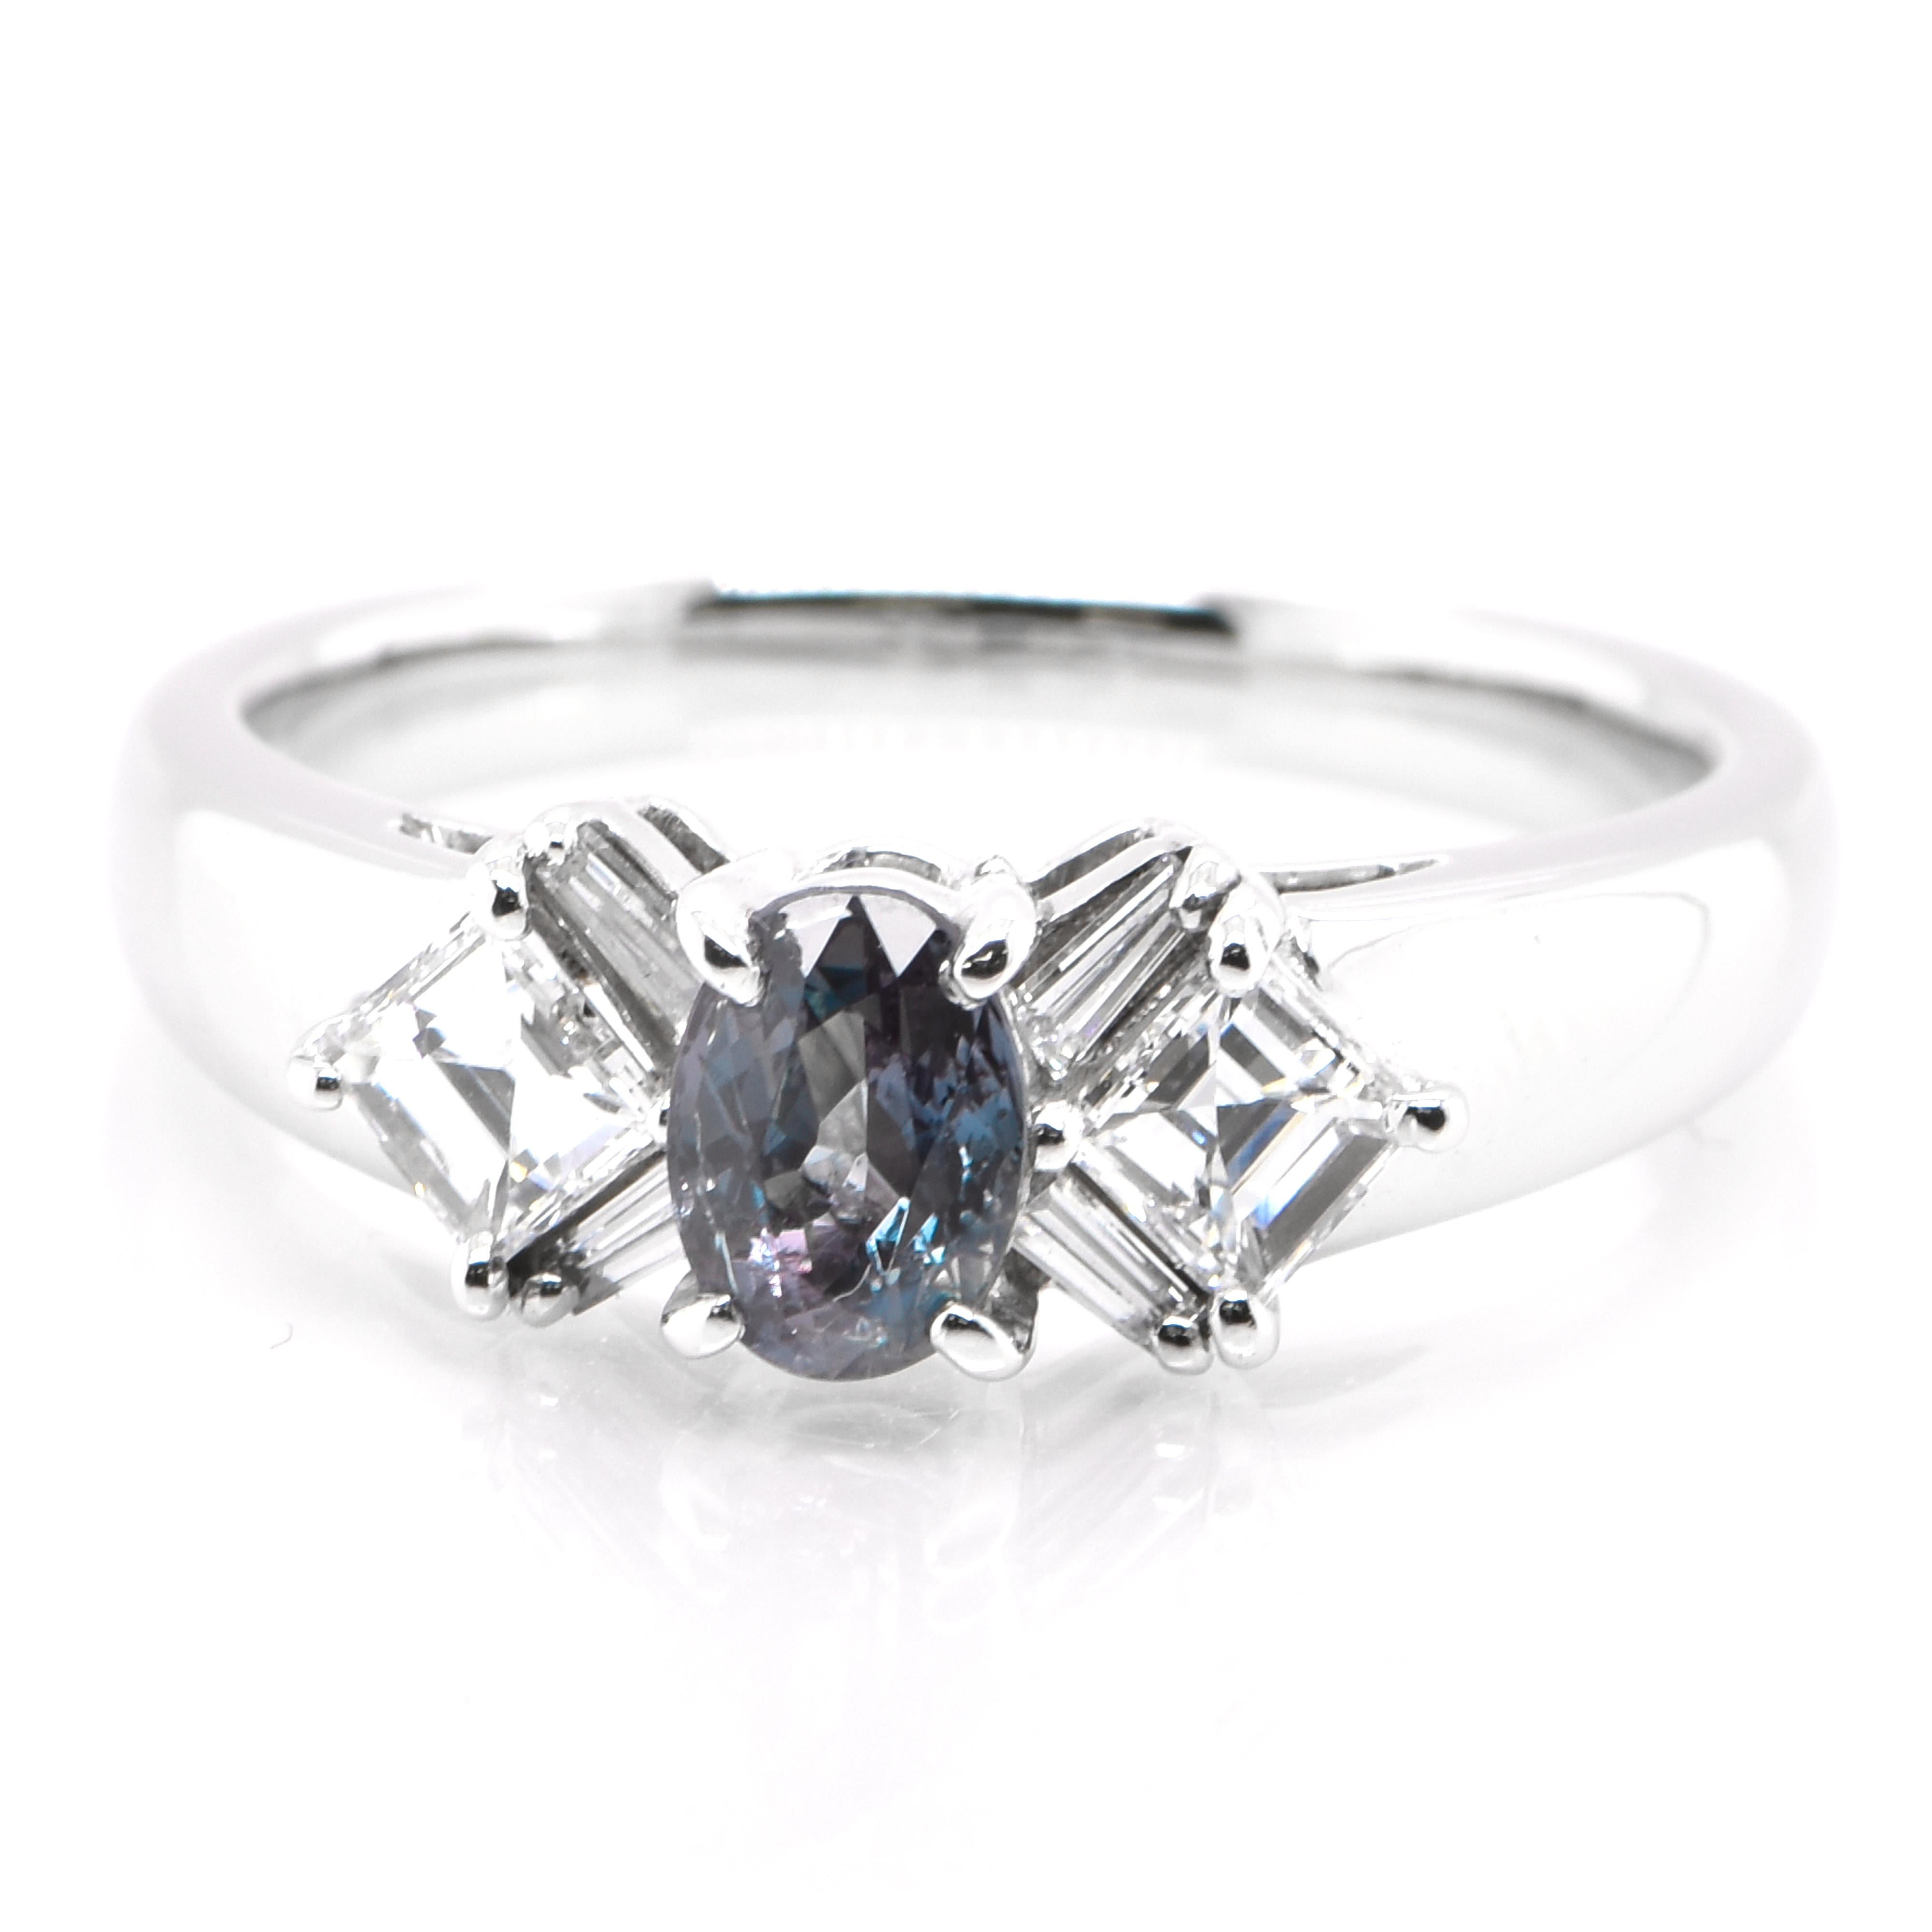 Modern 0.55 Carat Natural Color-Changing Alexandrite and Diamond Ring Set in Platinum